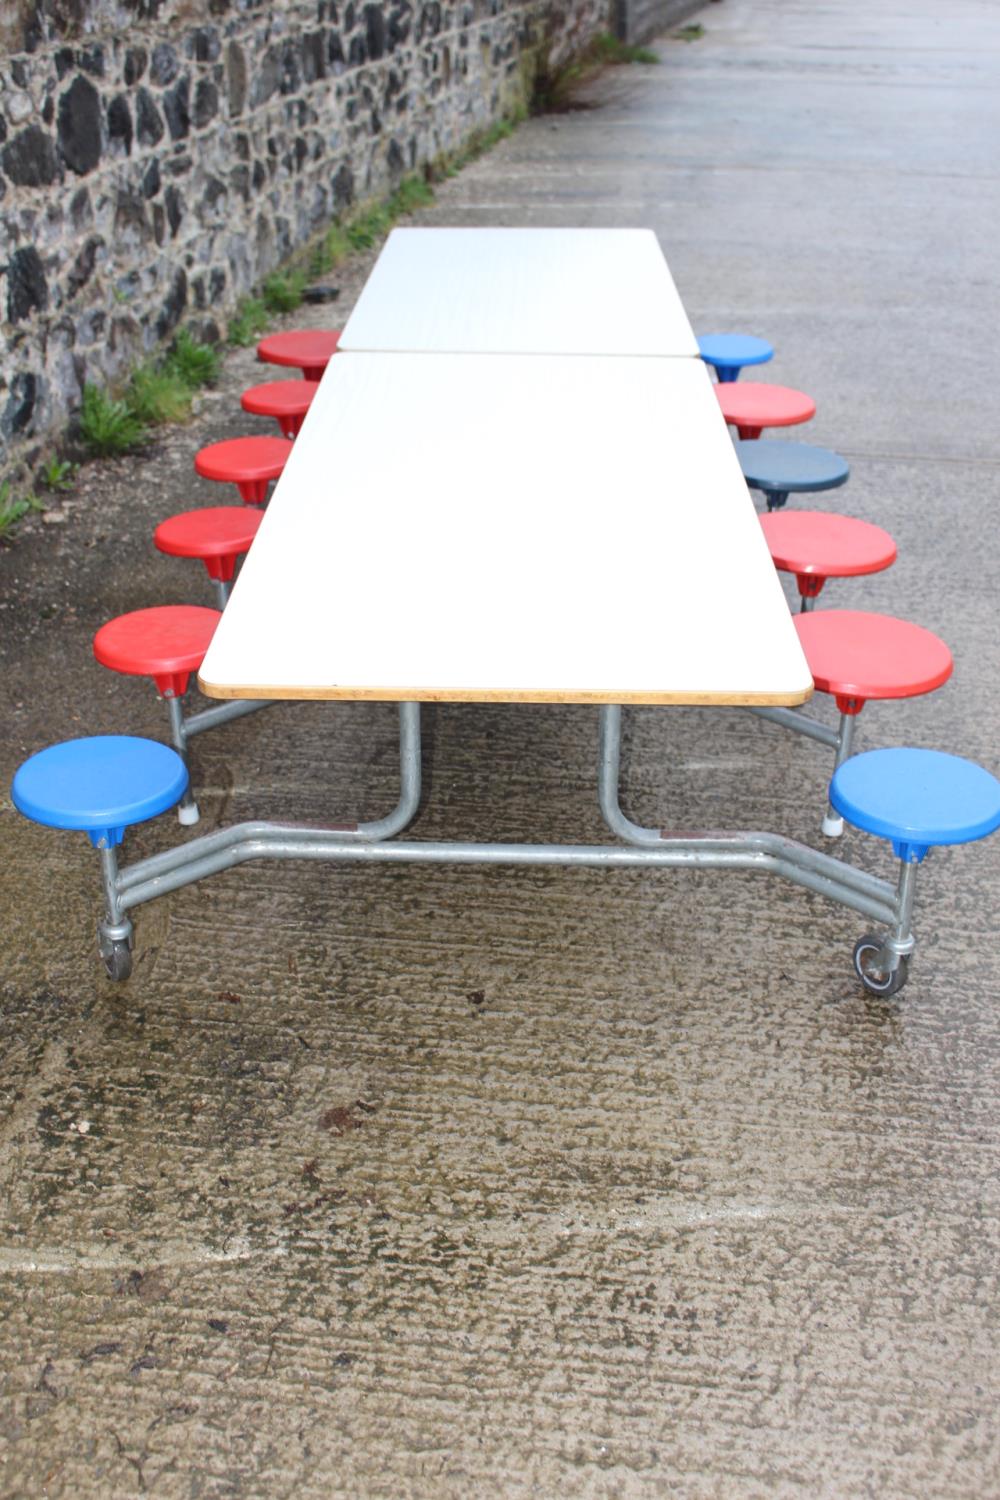 Children's two picnic table and seats - Image 2 of 3